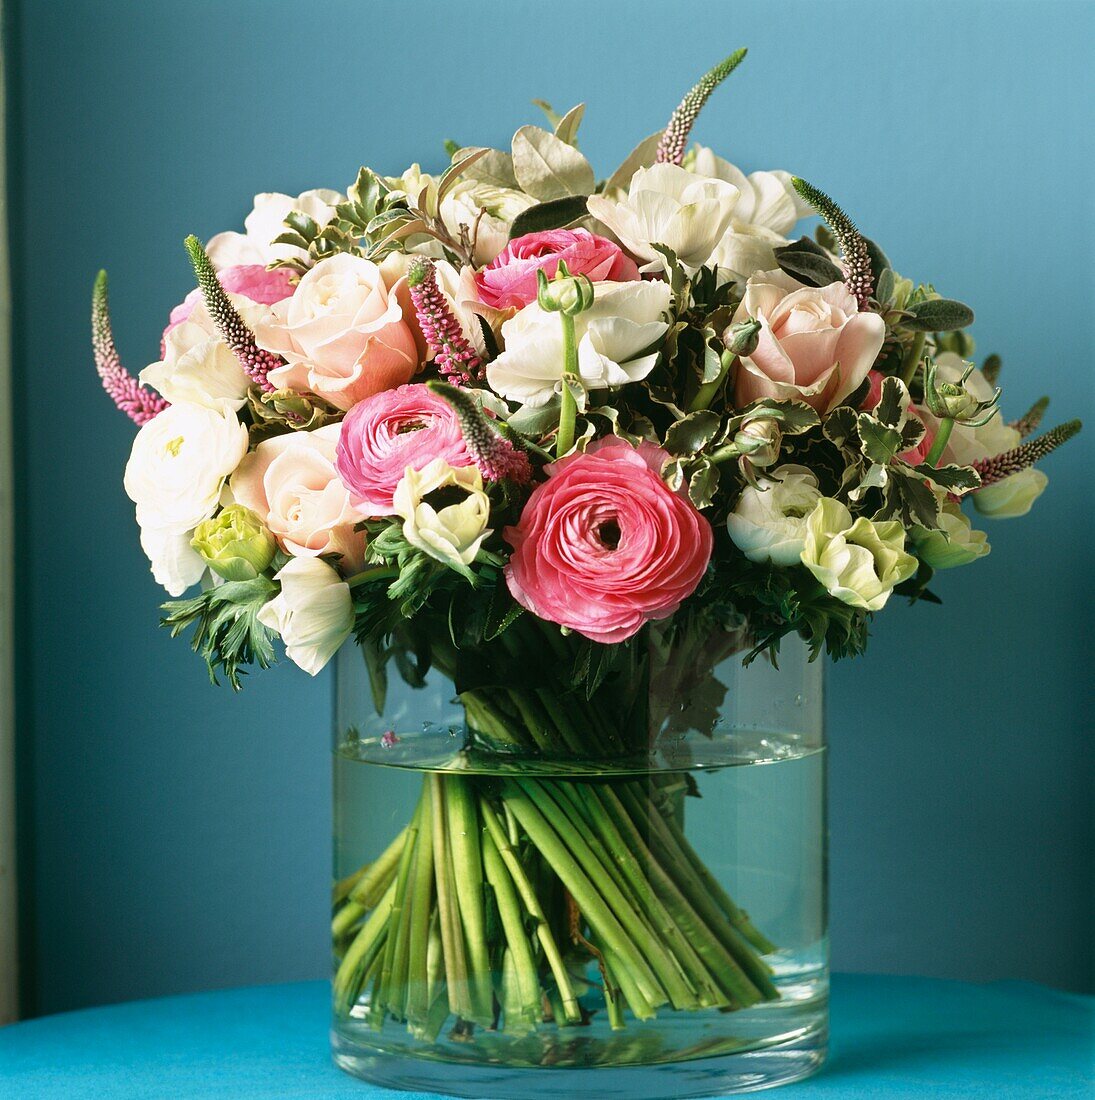 Bouquet of pink and white flowers in glass vase set against turquoise wall